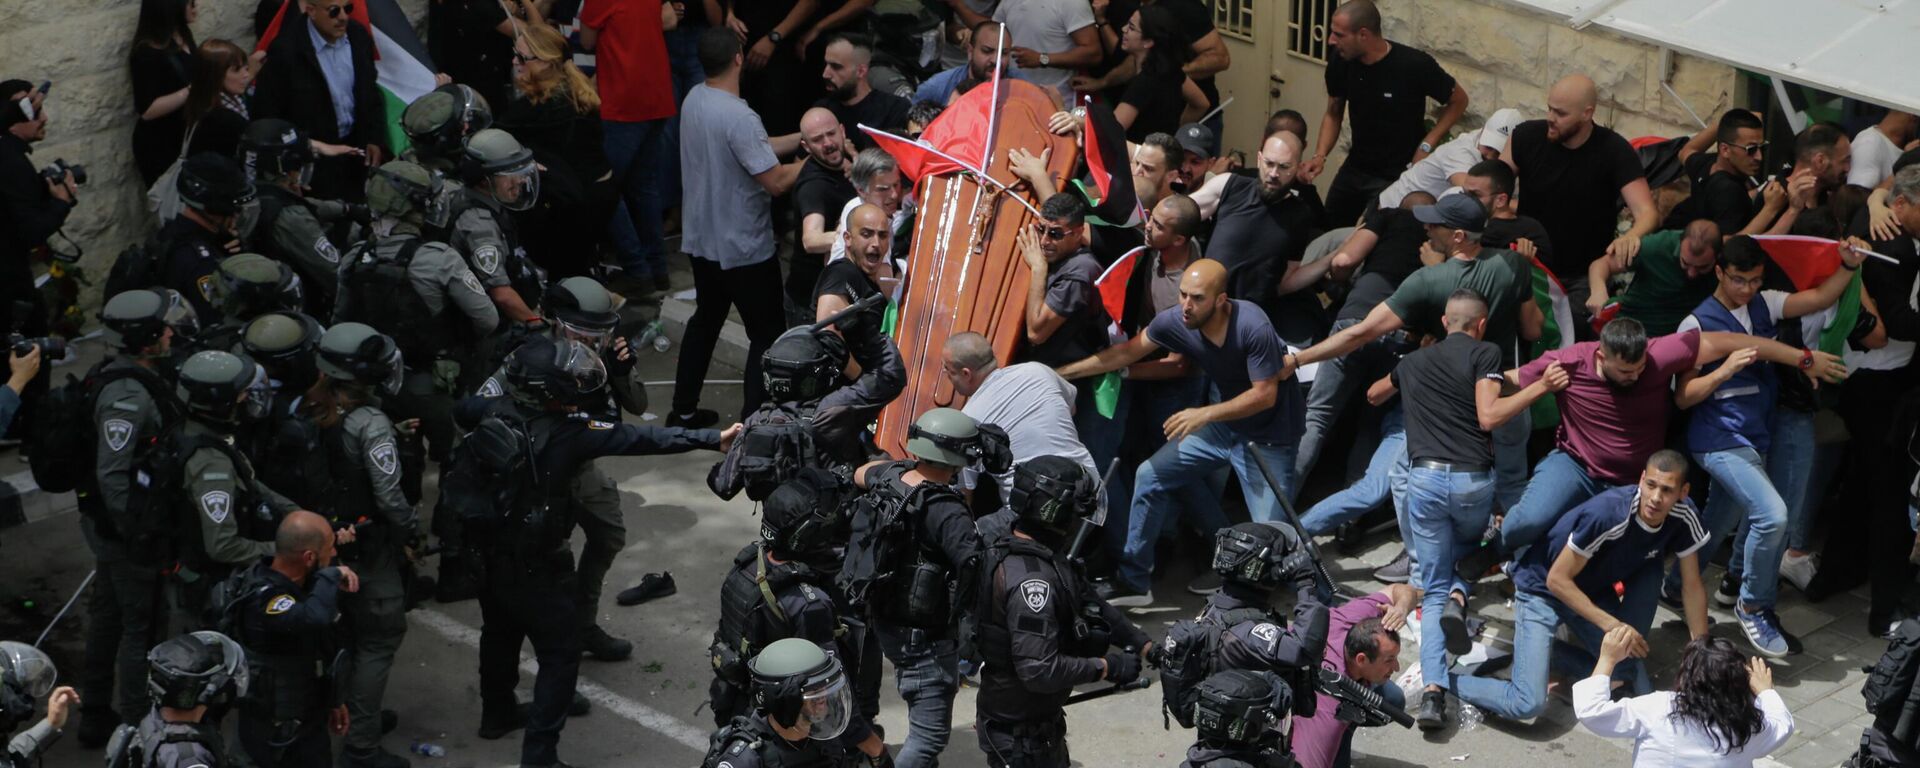 Israeli police confront with mourners as they carry the casket of slain Al Jazeera veteran journalist Shireen Abu Akleh during her funeral in east Jerusalem, Friday, May 13, 2022.  - Sputnik International, 1920, 13.05.2022